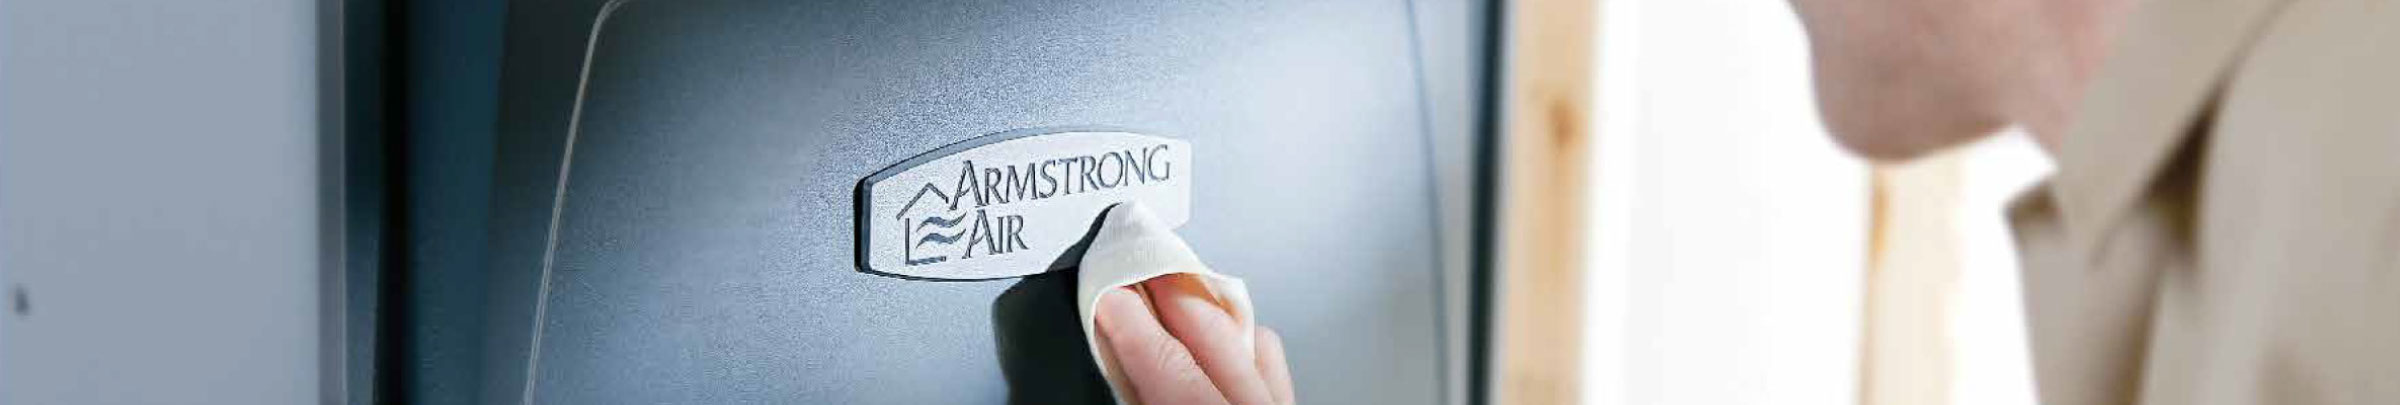 Armstrong Air Furnaces are reliable and efficient heating systems. Call us today for your estimate or for any service you need!